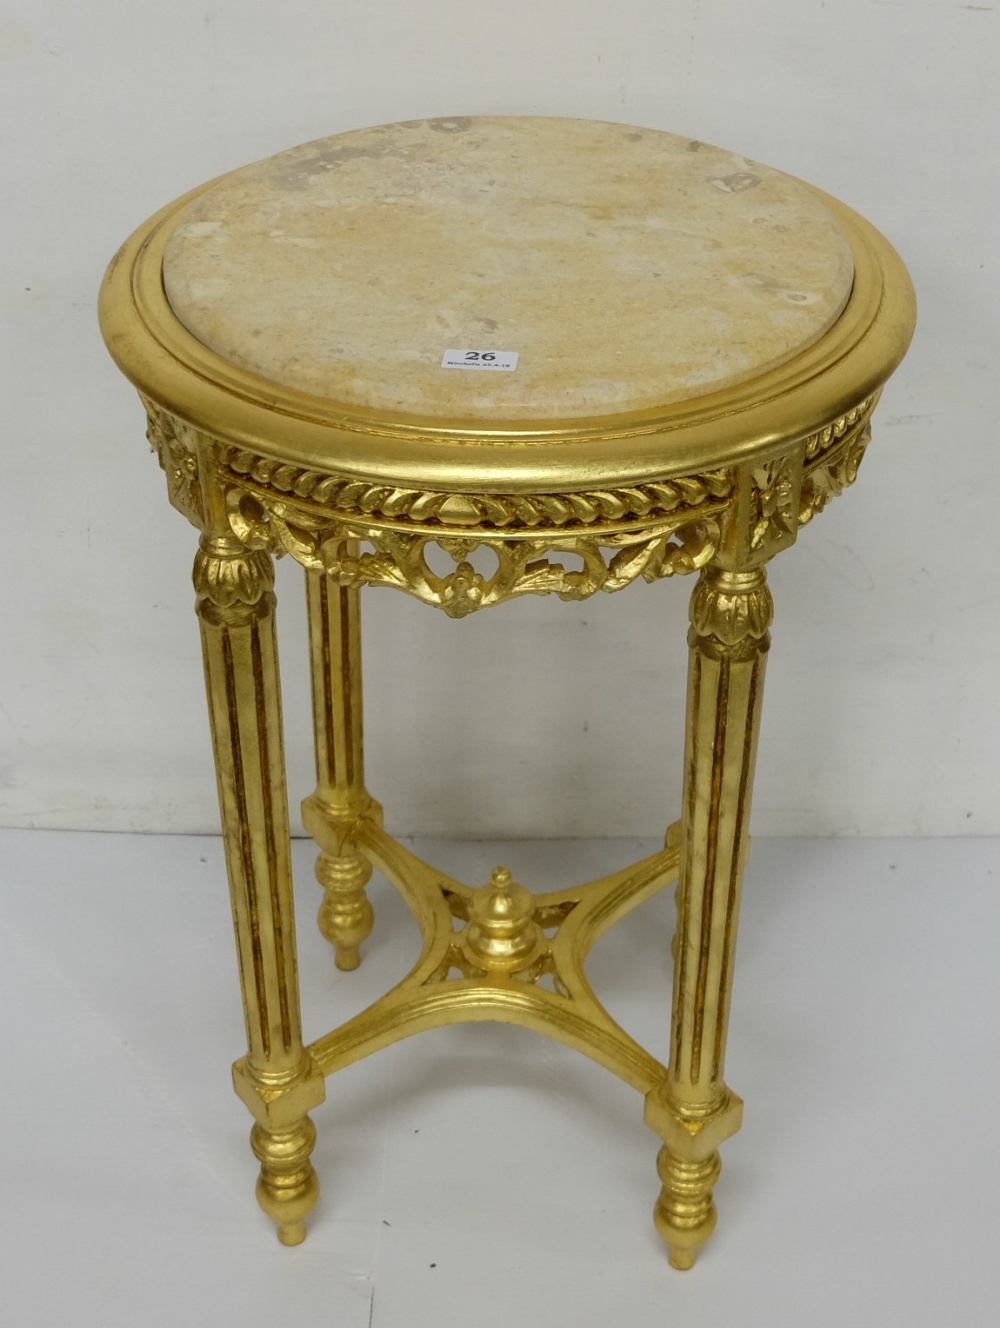 Circular Occasional Table, painted gold with a beige marble top, 19” dia